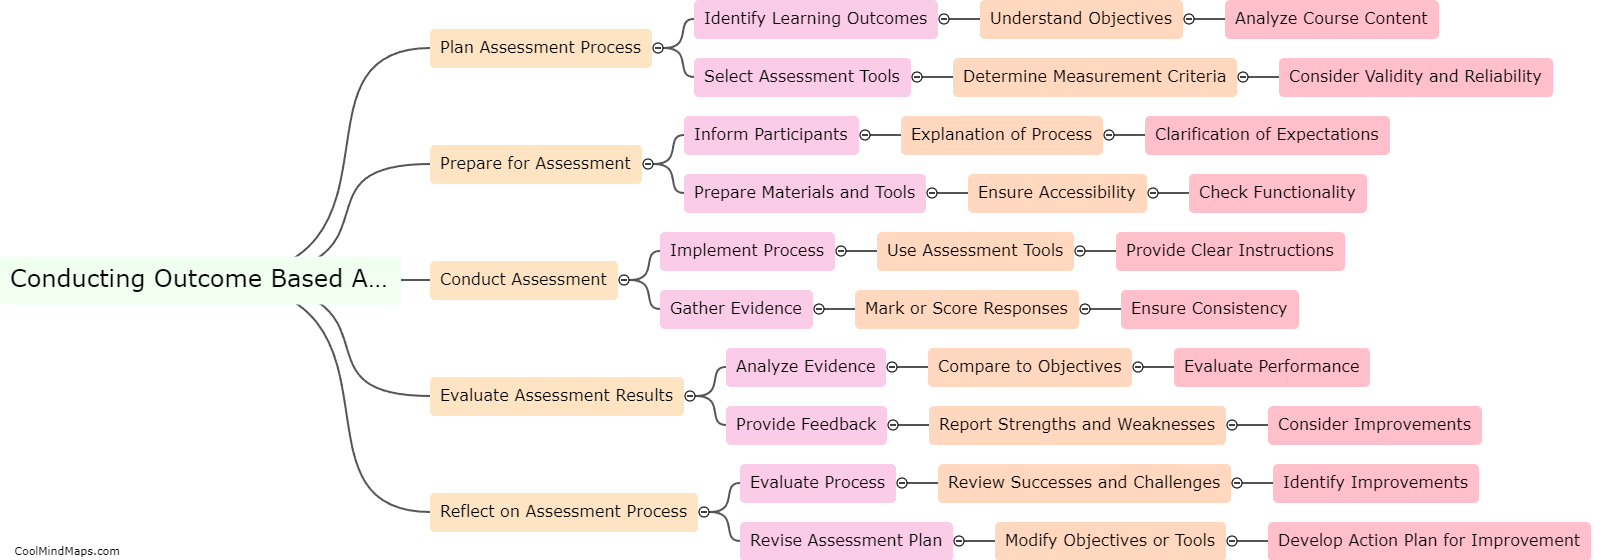 What are the steps involved in conducting outcome based assessment?